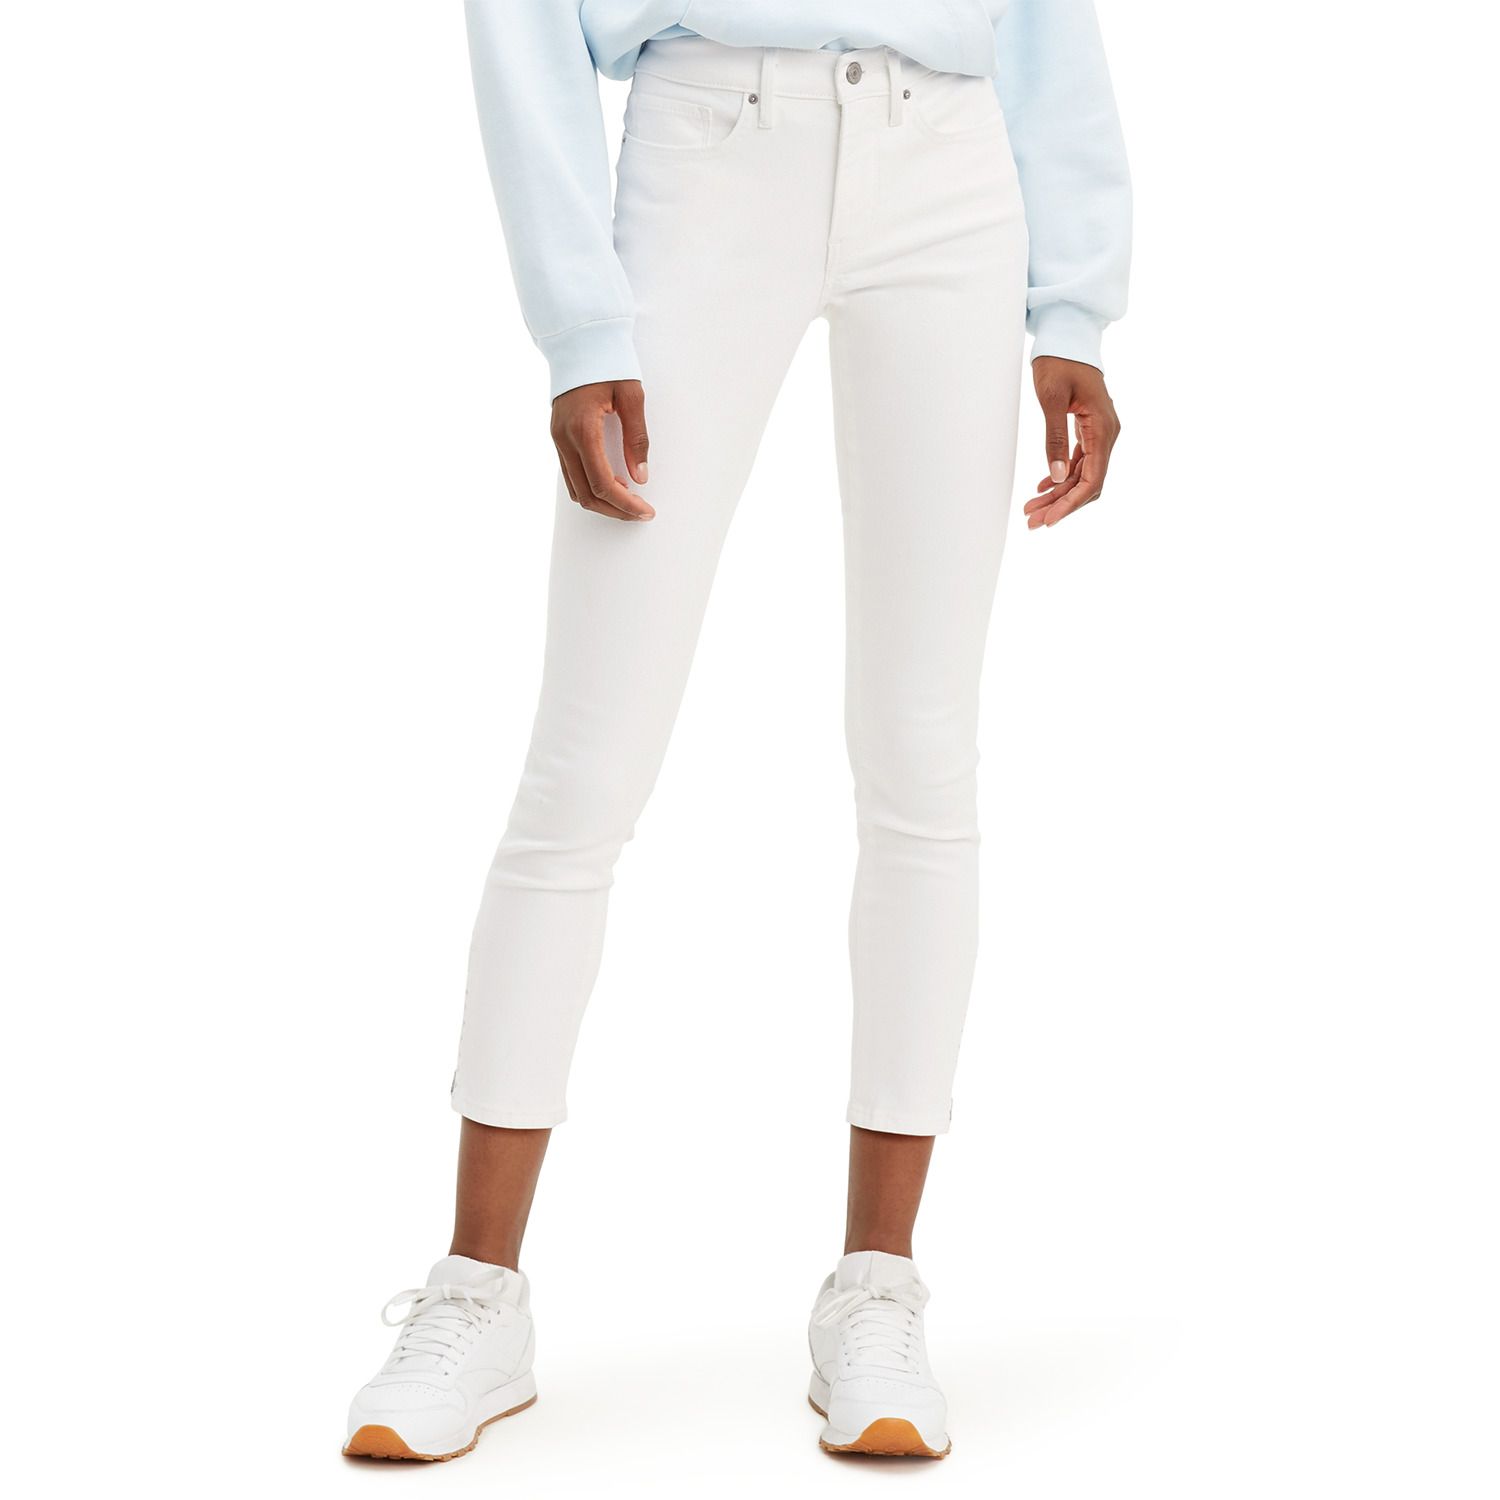 levi's 311 shaping skinny jeans white